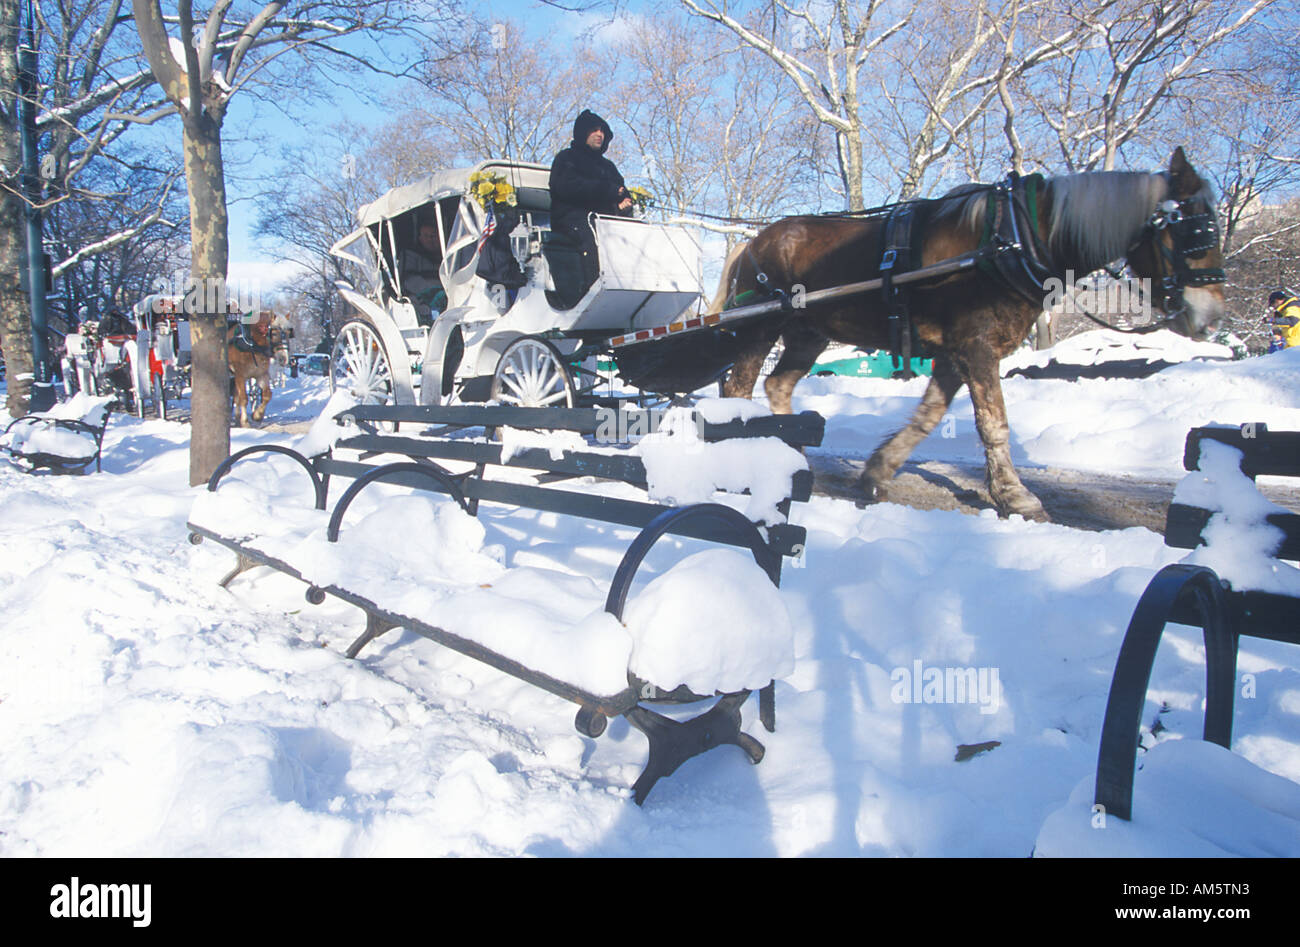 Horse carriage ride in Central Park Manhattan New York City NY after winter snowstorm Stock Photo